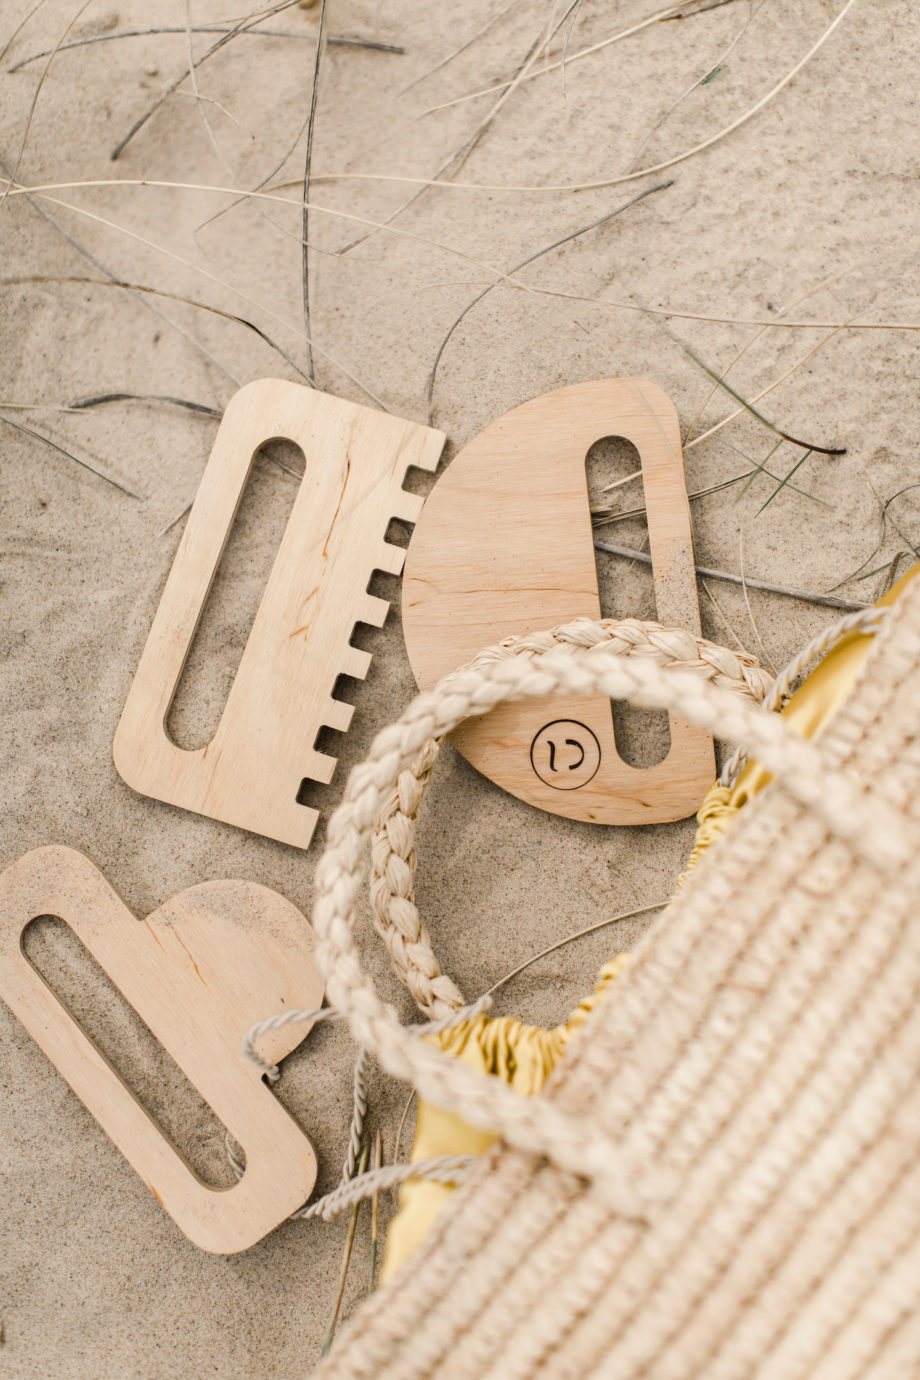 sand combs, wooden beach toys